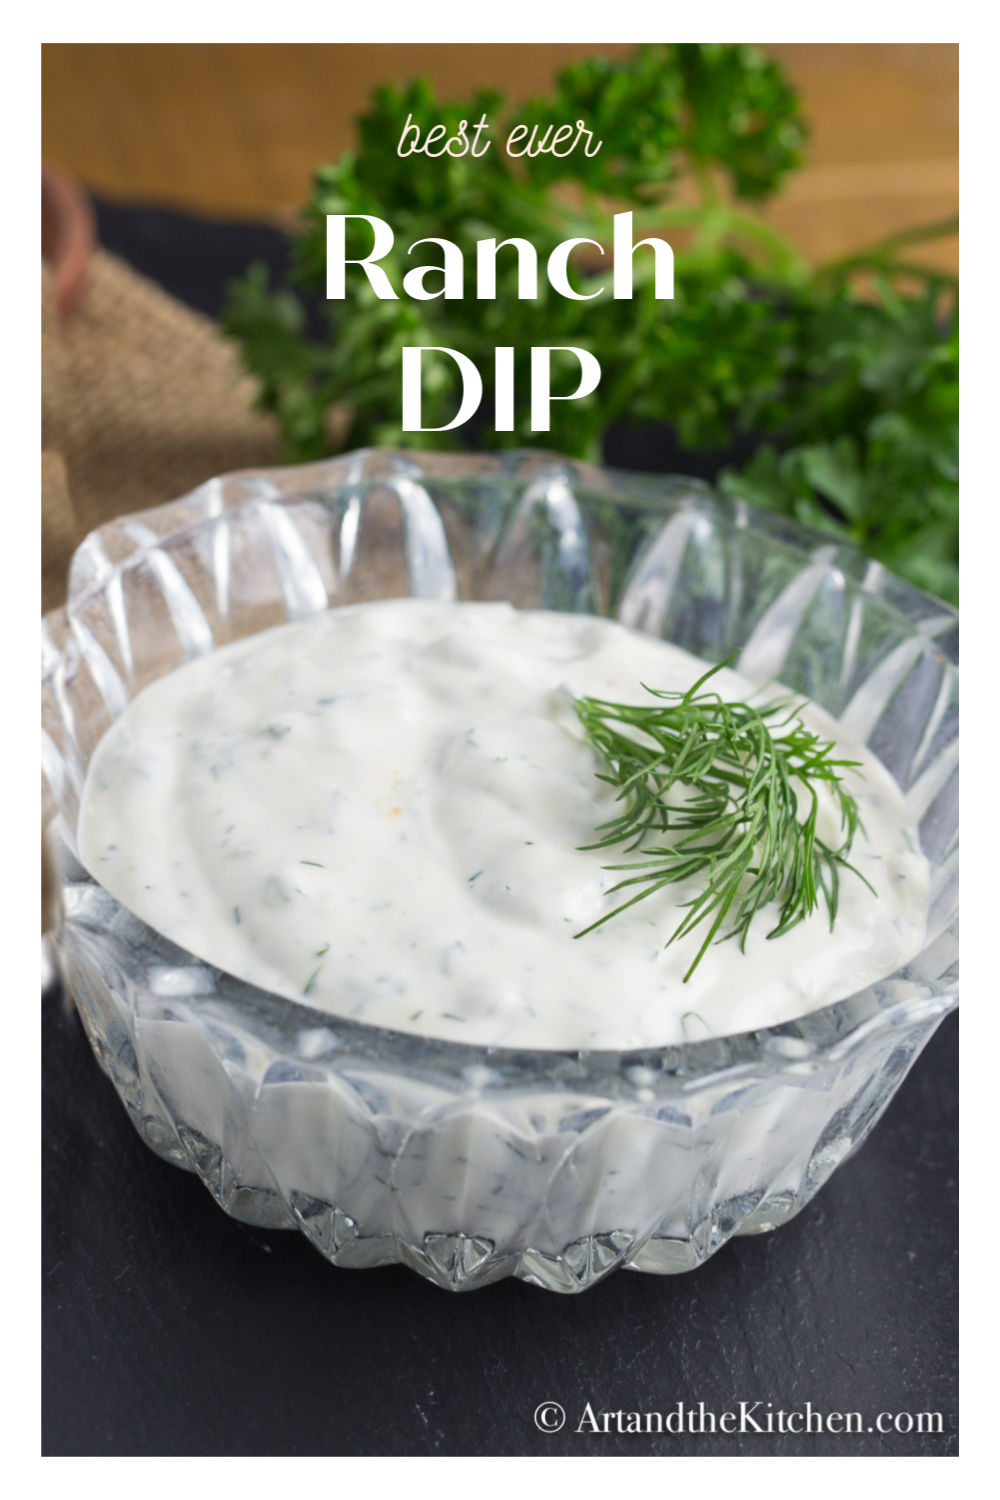 Creamy Ranch Dip is super flavourful and made from scratch! Quick and easy to make with fresh herbs of dill, parsley and green onion. No preservatives!  via @artandthekitch